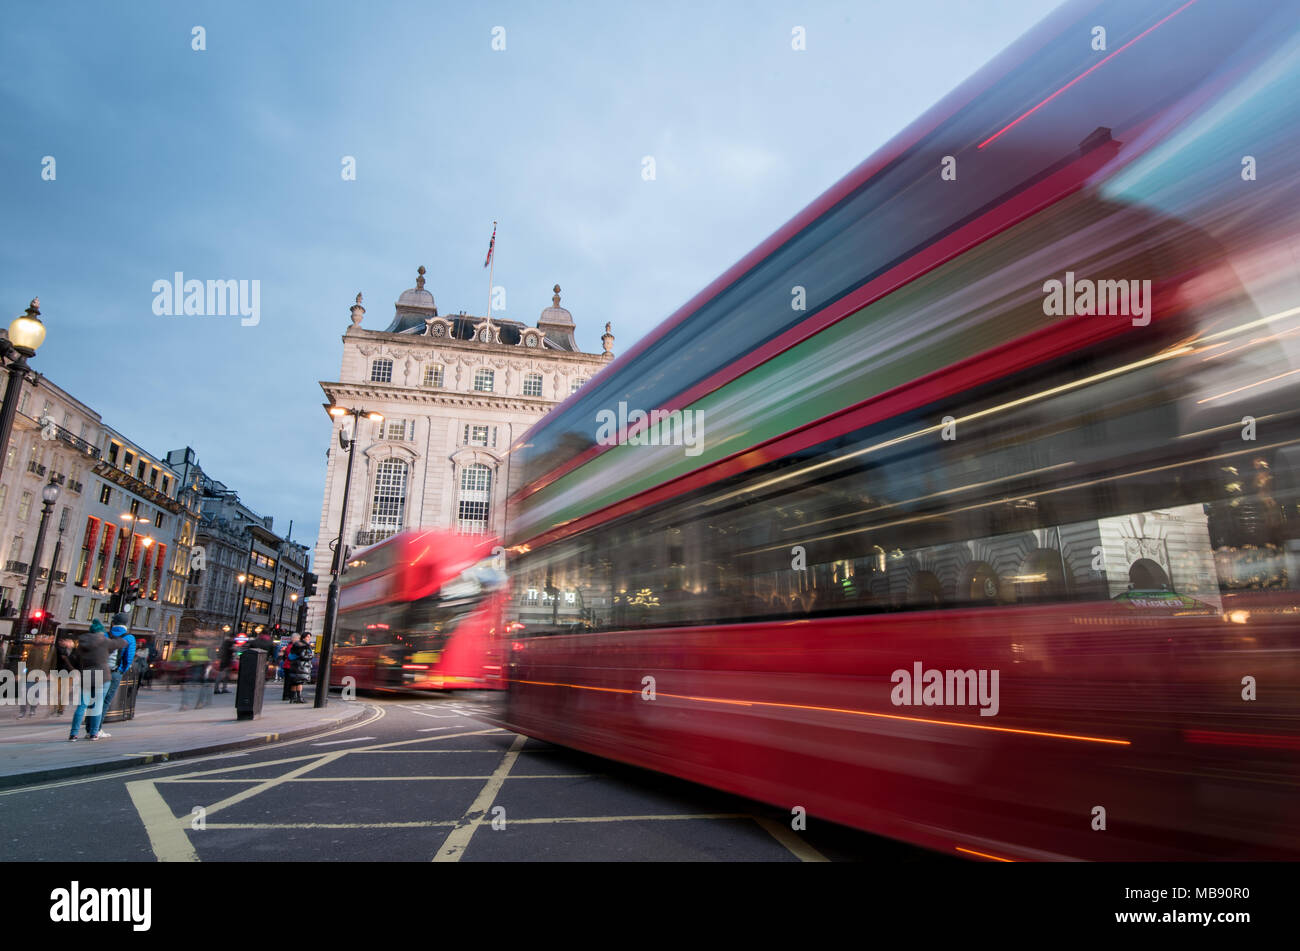 London, England - March 19, 2018: Night scene from the famous London Piccadilly circus square  at the center of London with cars and buses leaving col Stock Photo